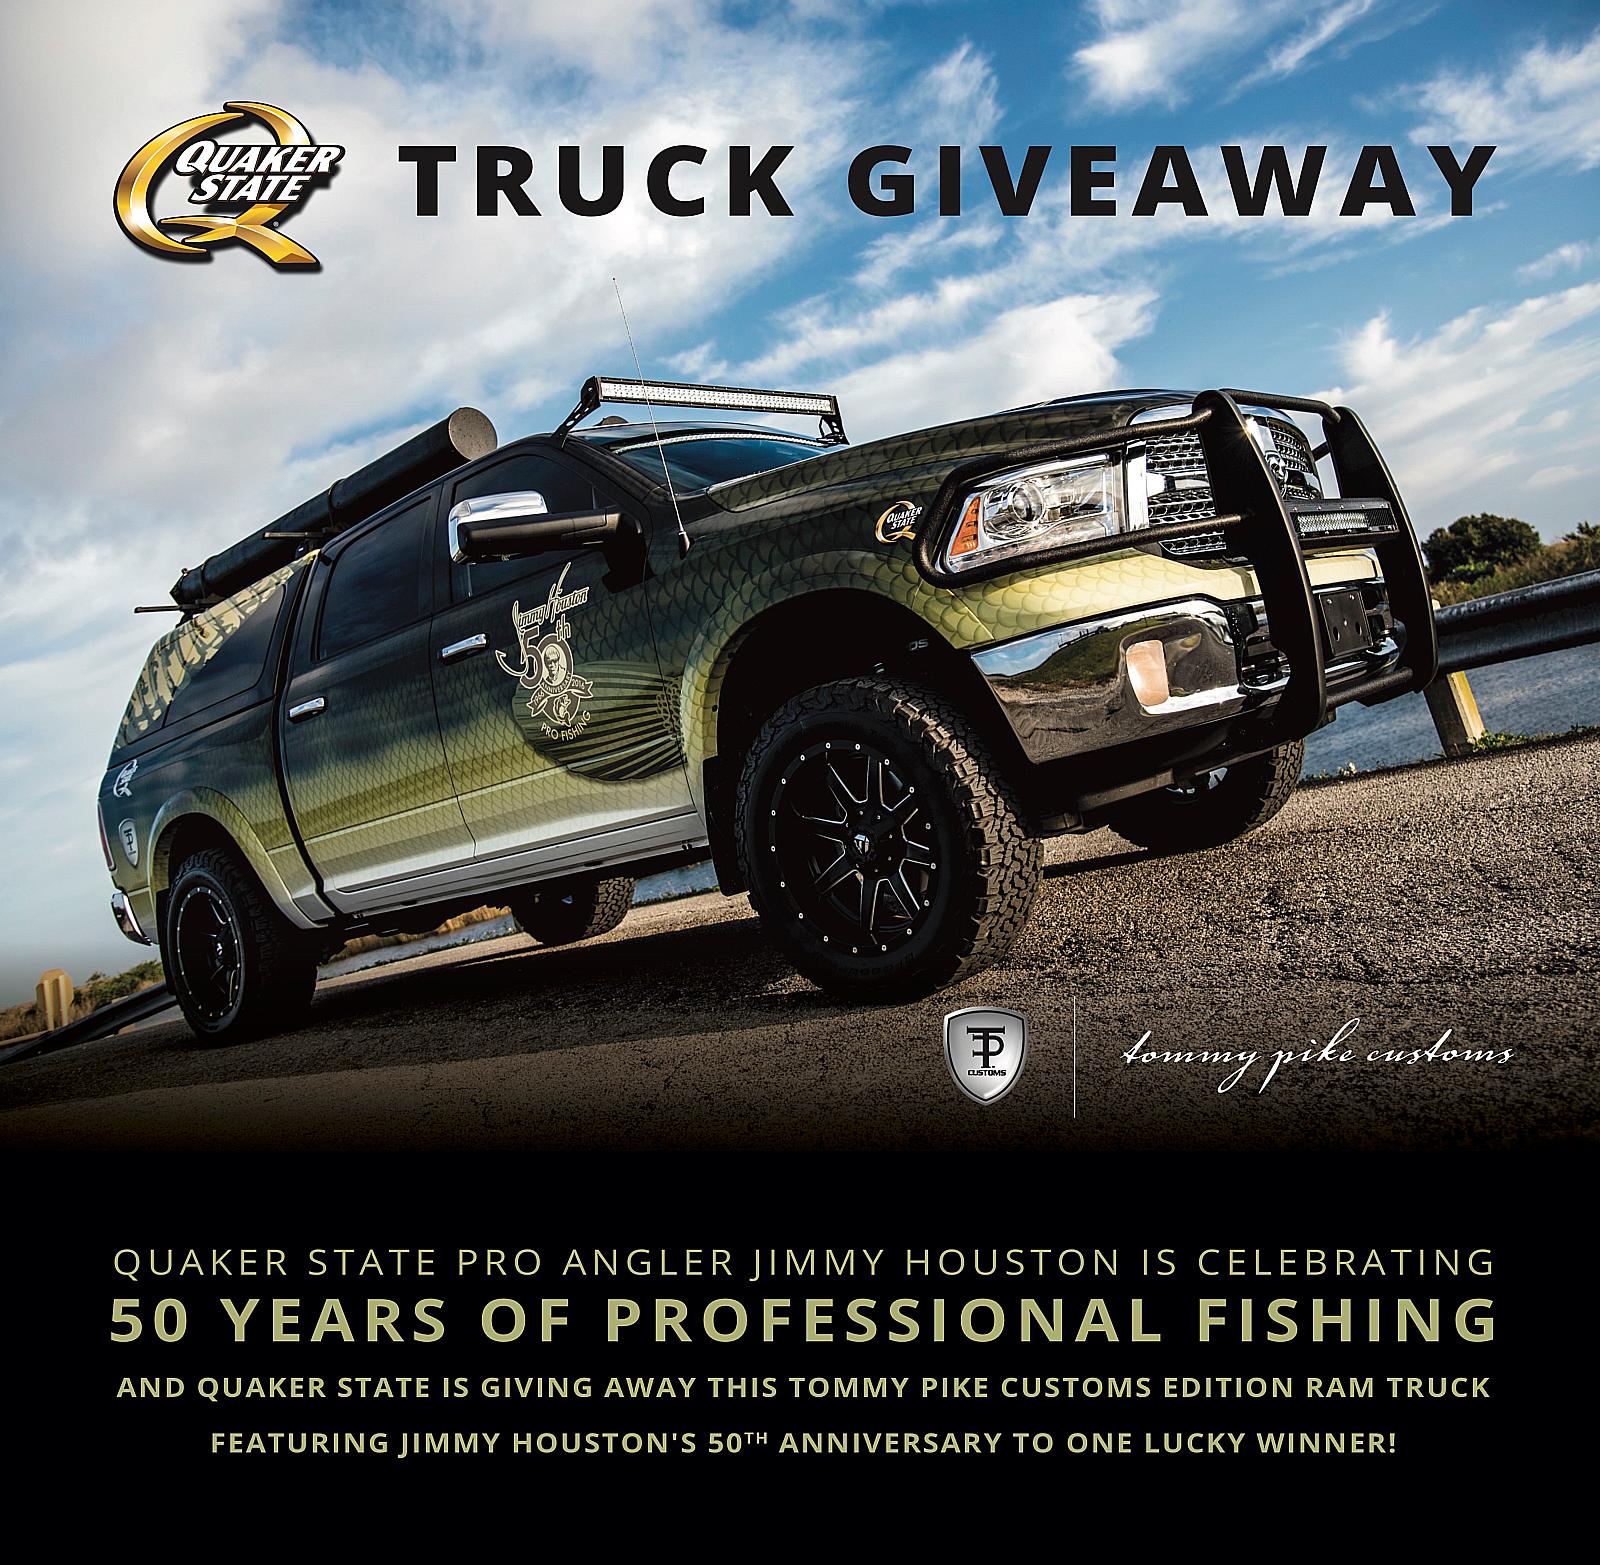 THE BIG $60,000 GIVEAWAY & BOAT SHOW IN GREENVILLE, MI